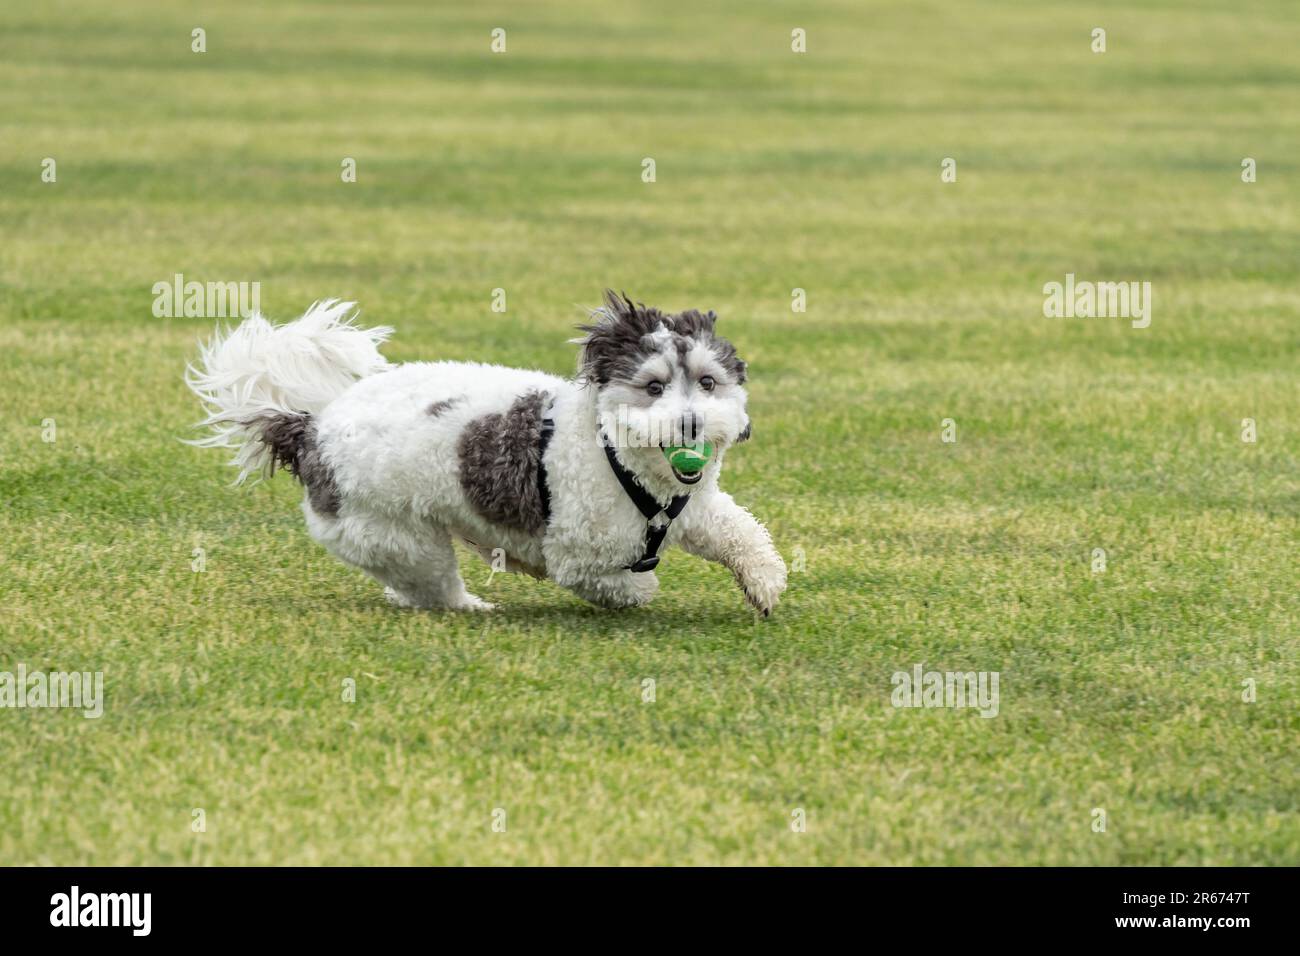 Black and White Havanese puppy playing fetch with orange ball in backyard Stock Photo